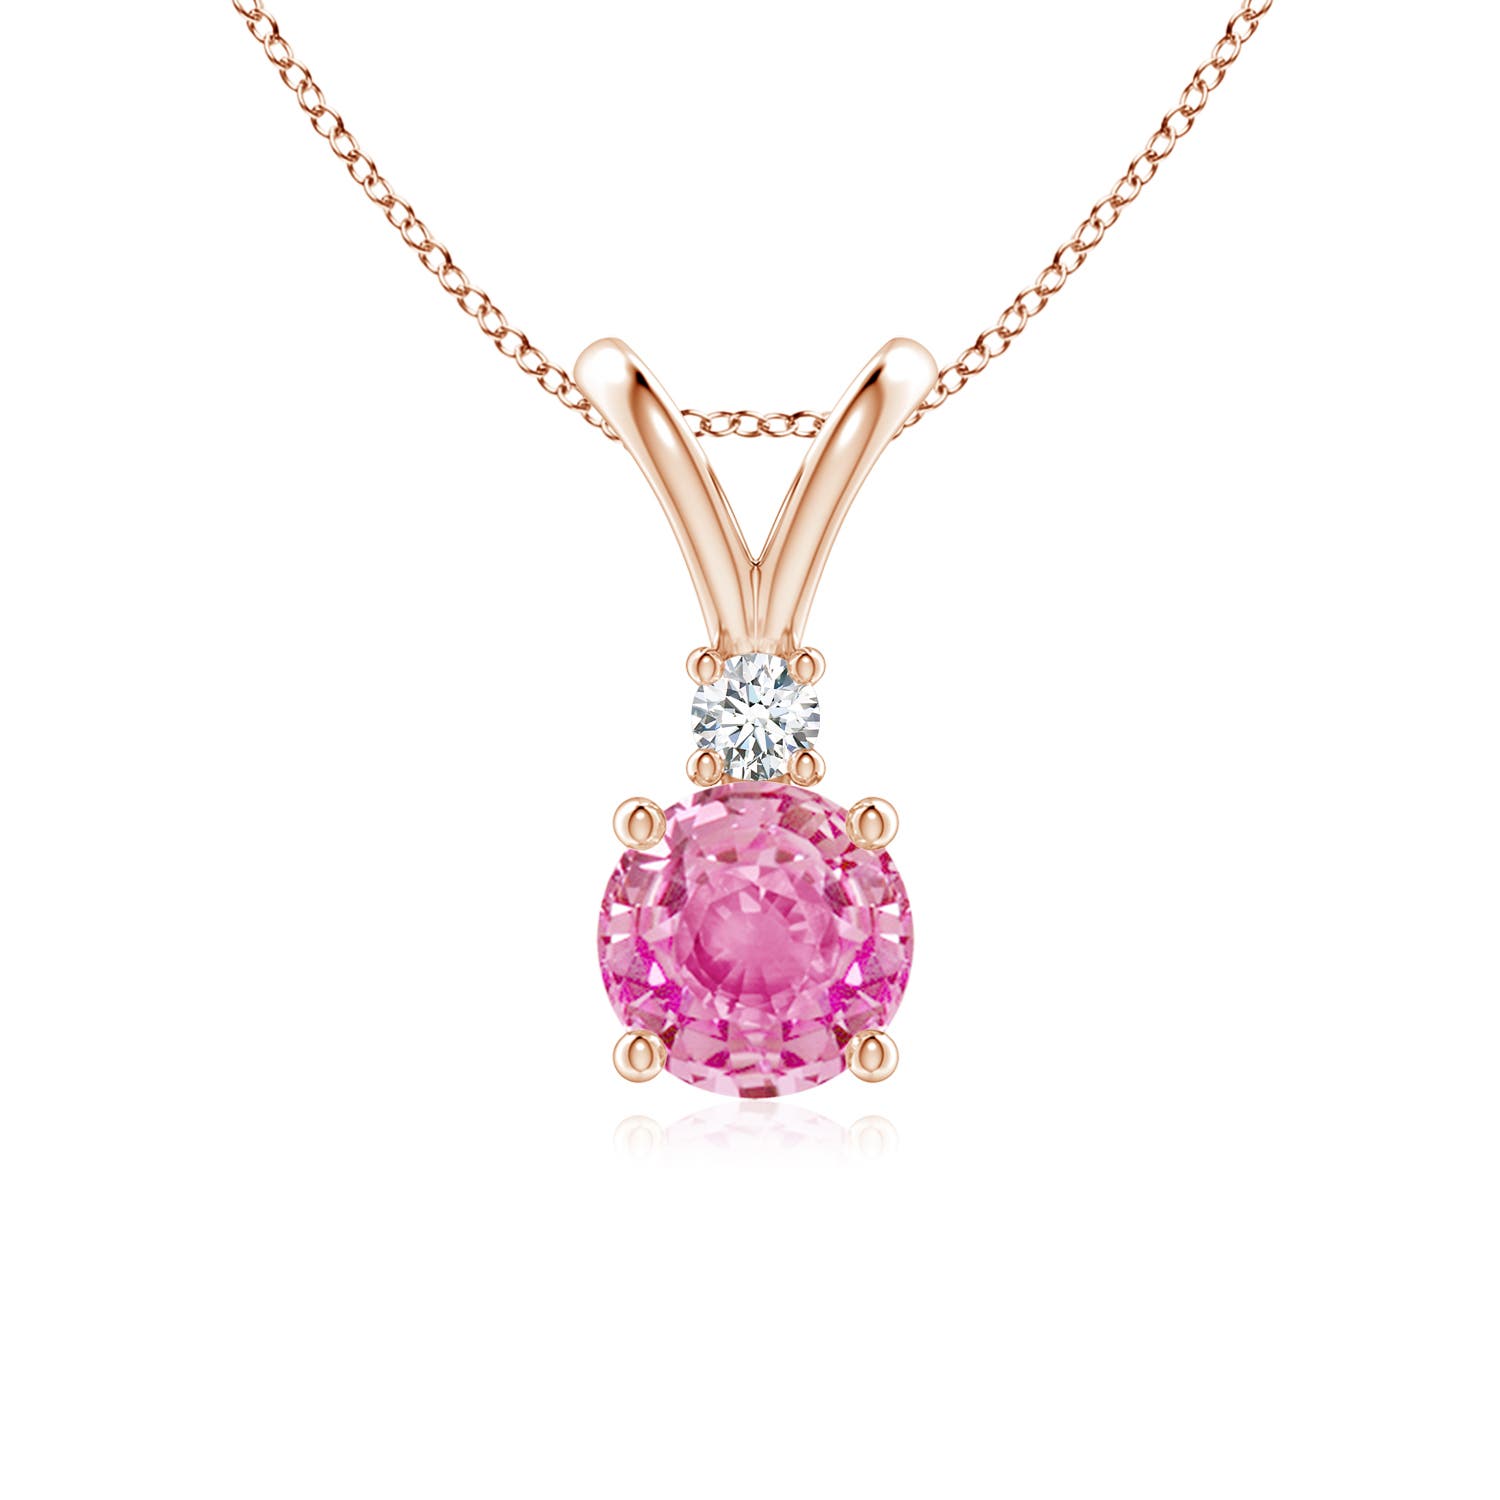 AA - Pink Sapphire / 1.04 CT / 14 KT Rose Gold